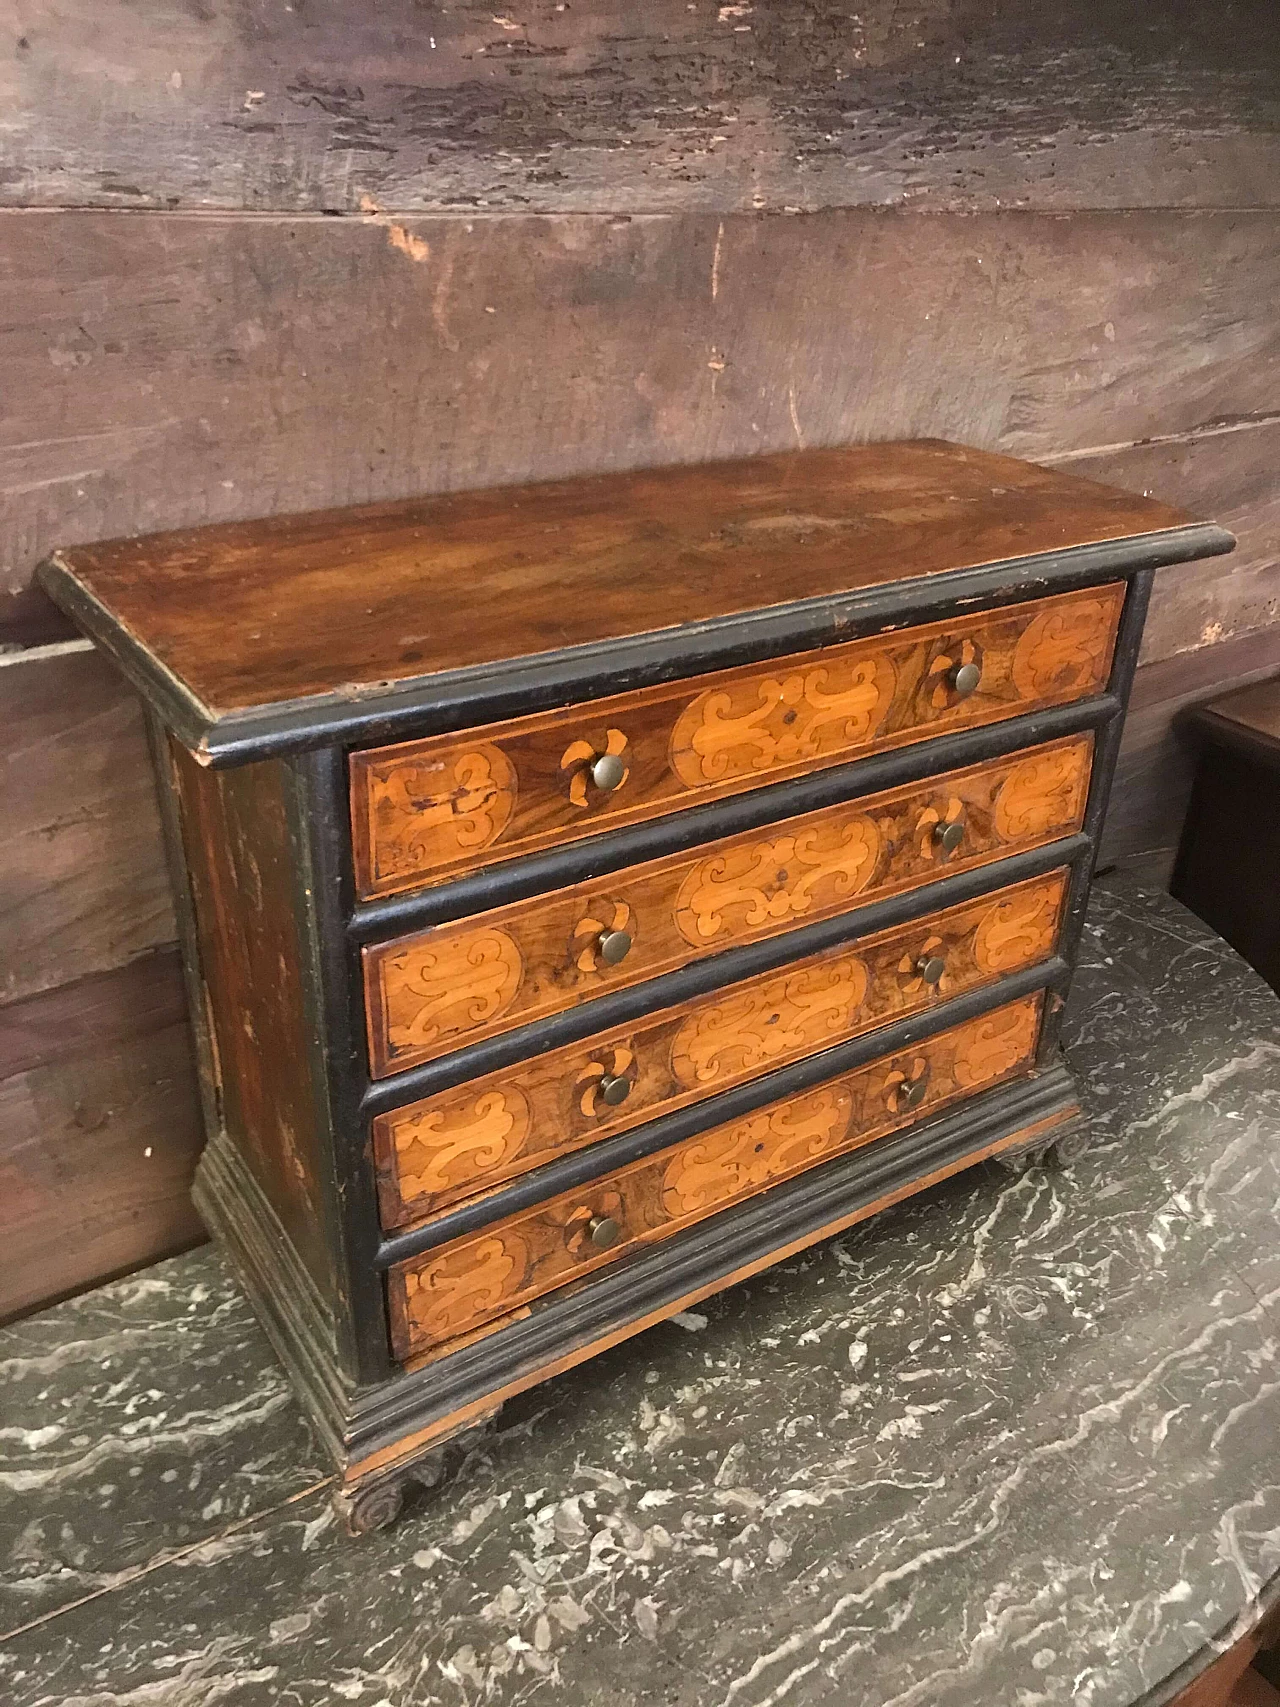 Lombard antique miniature dresser, prototype or model in inlaid walnut, original early 18th century 1185860